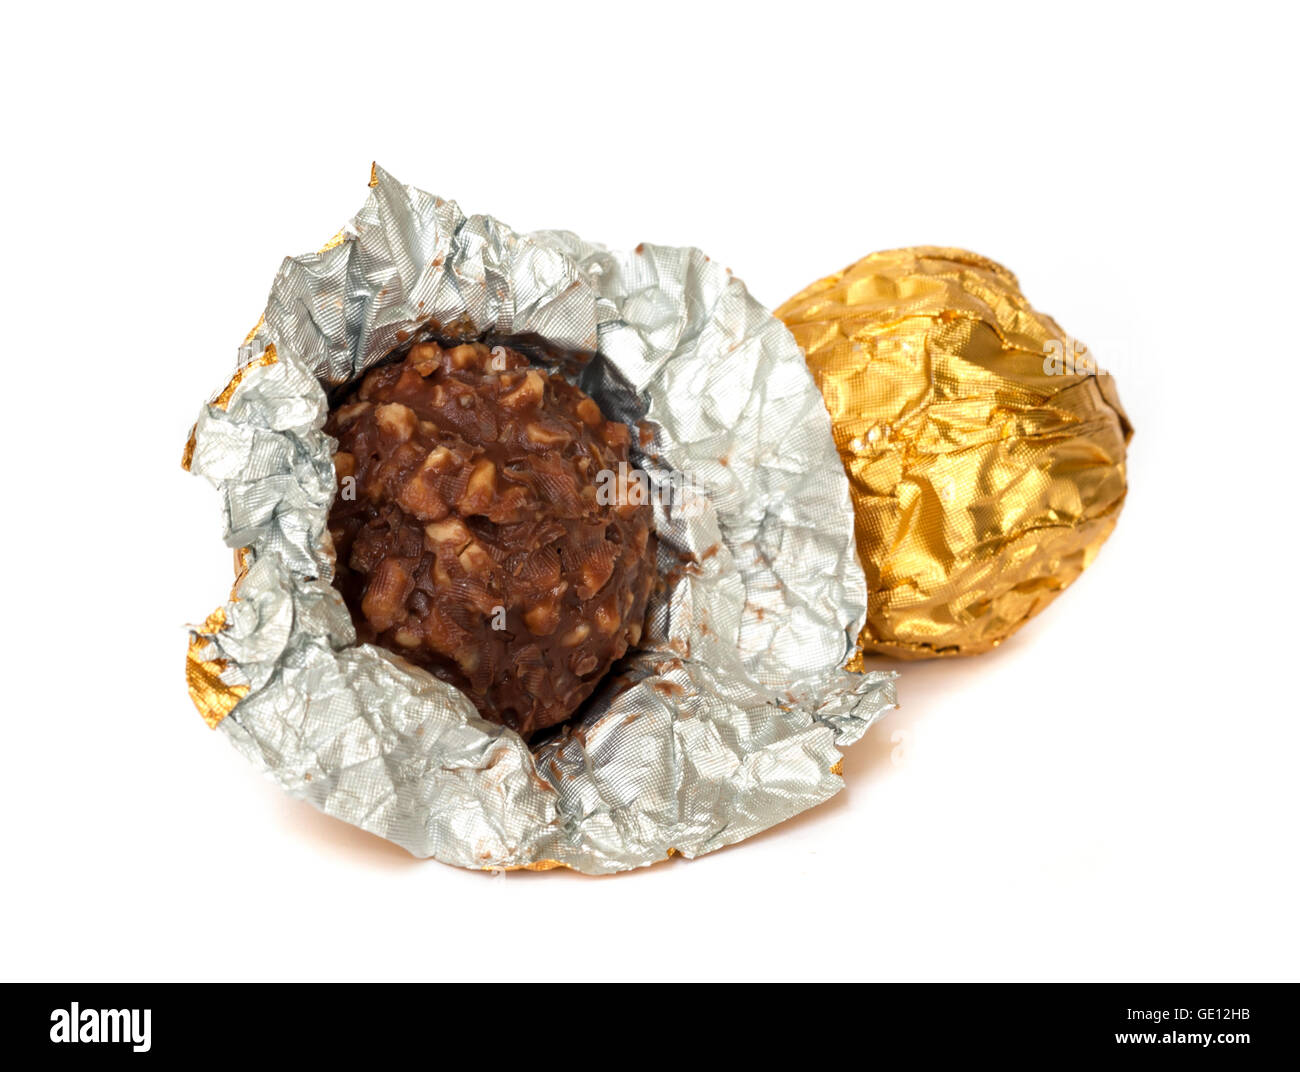 Chocolate balls with almond  in a gold foil paper. Stock Photo